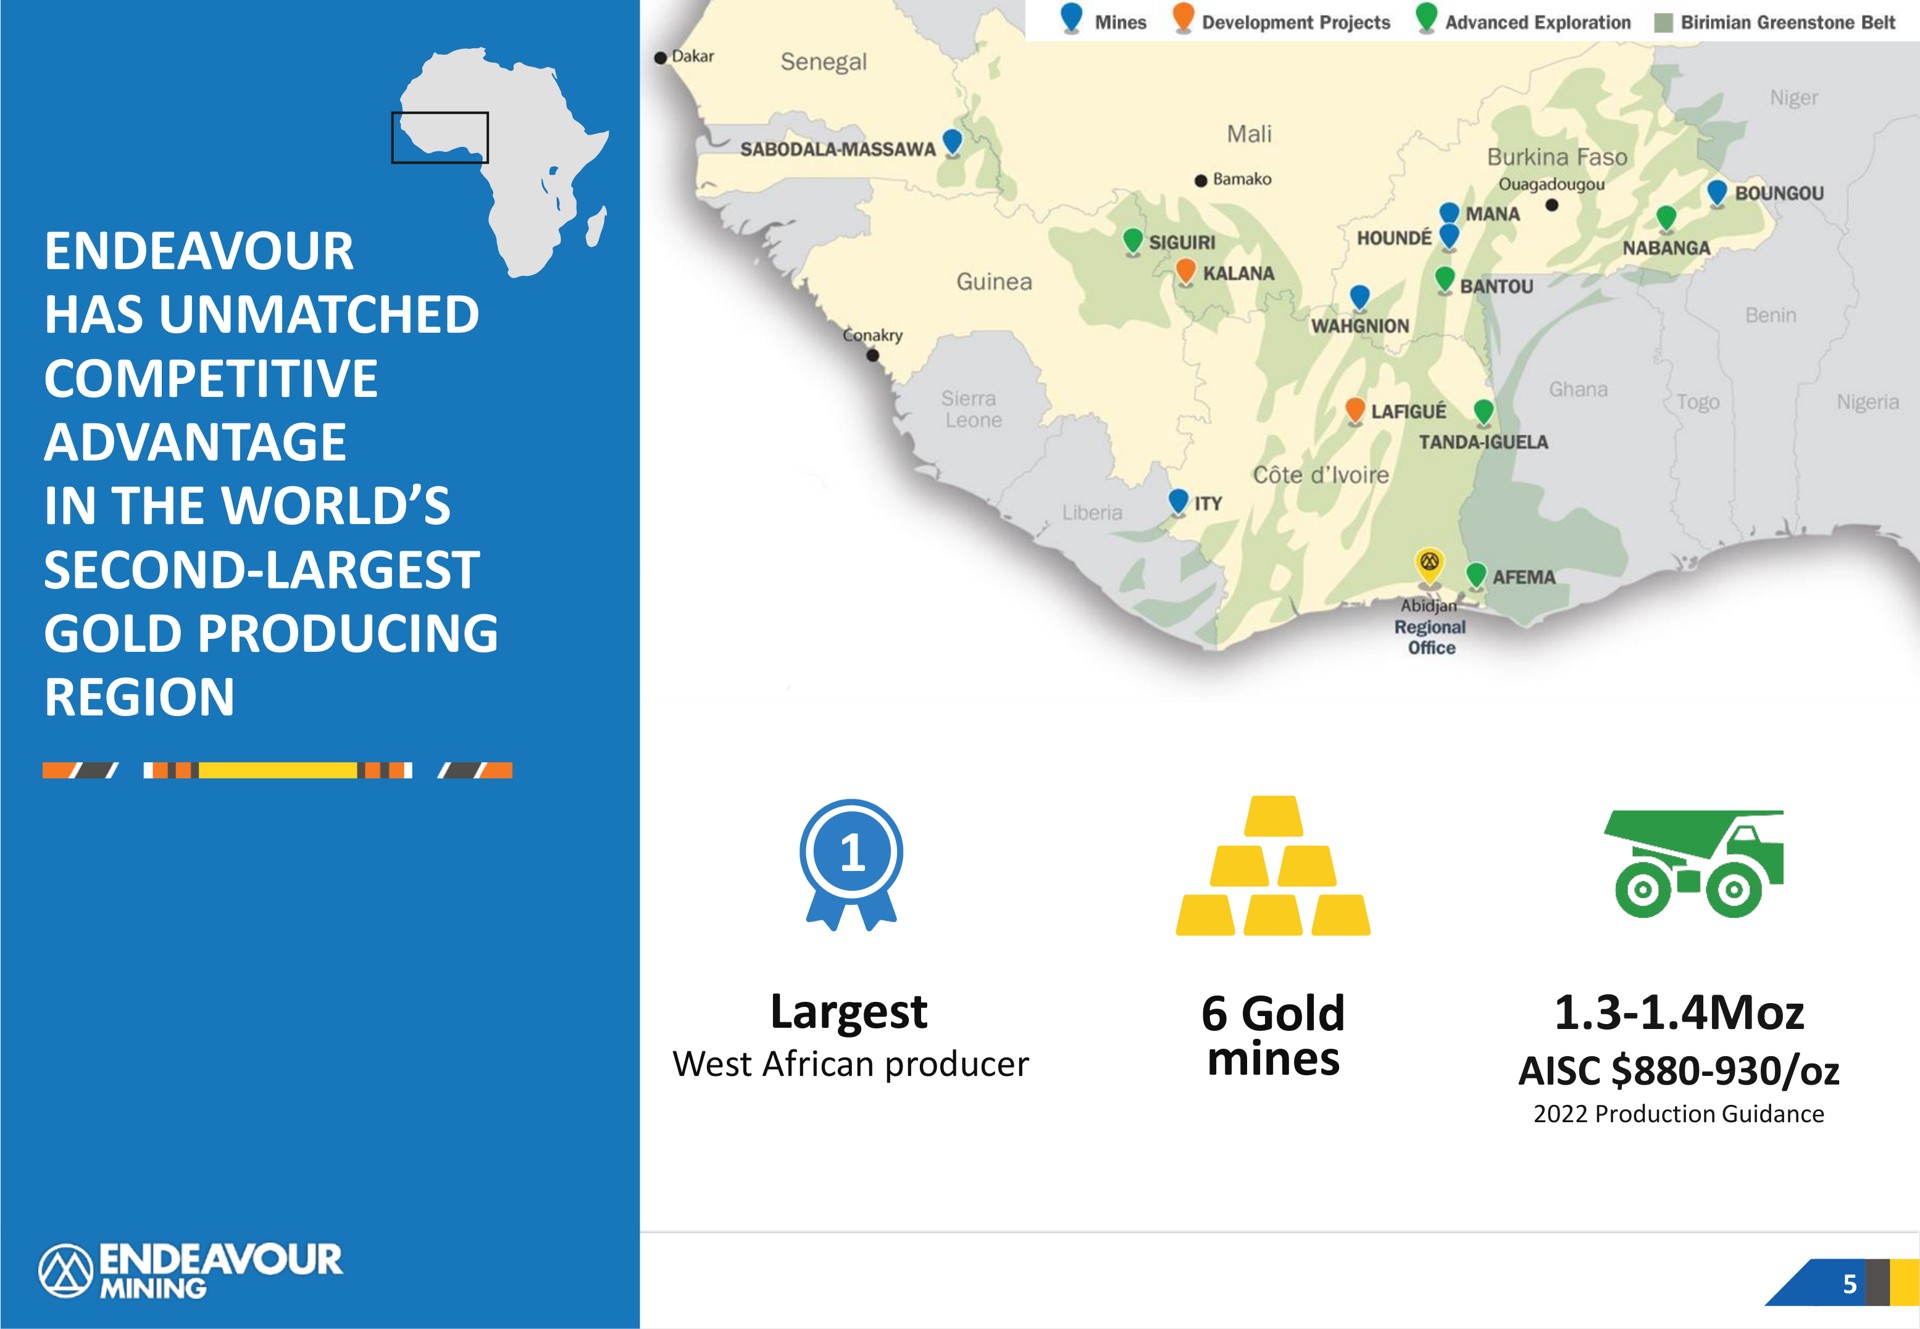 has unmatched competitive advantage in the world second gold producing region gold mines wee a on | Endeavour Mining